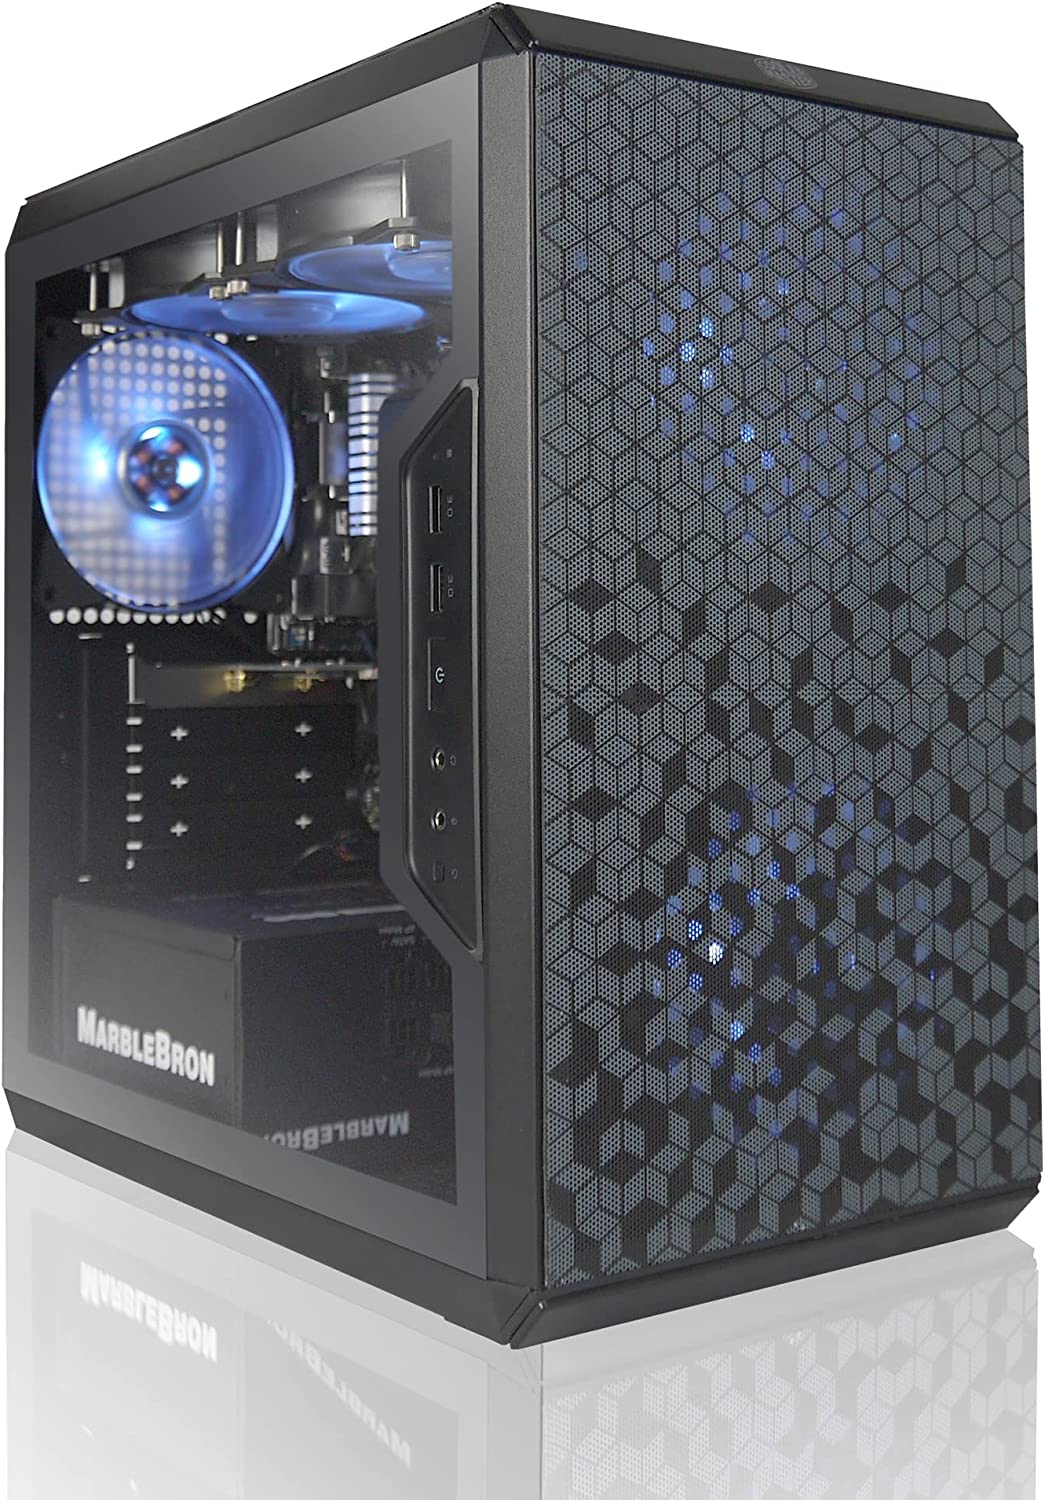 AVGPC Q-Box Series Gaming PC - 4.6 GHz Max Boost AMD Ryzen 7 5700G 8-Core, 16-Thread CPU with Radeon Graphics Cools with 240mm Liquid Cooler 16GB DDR4 3200